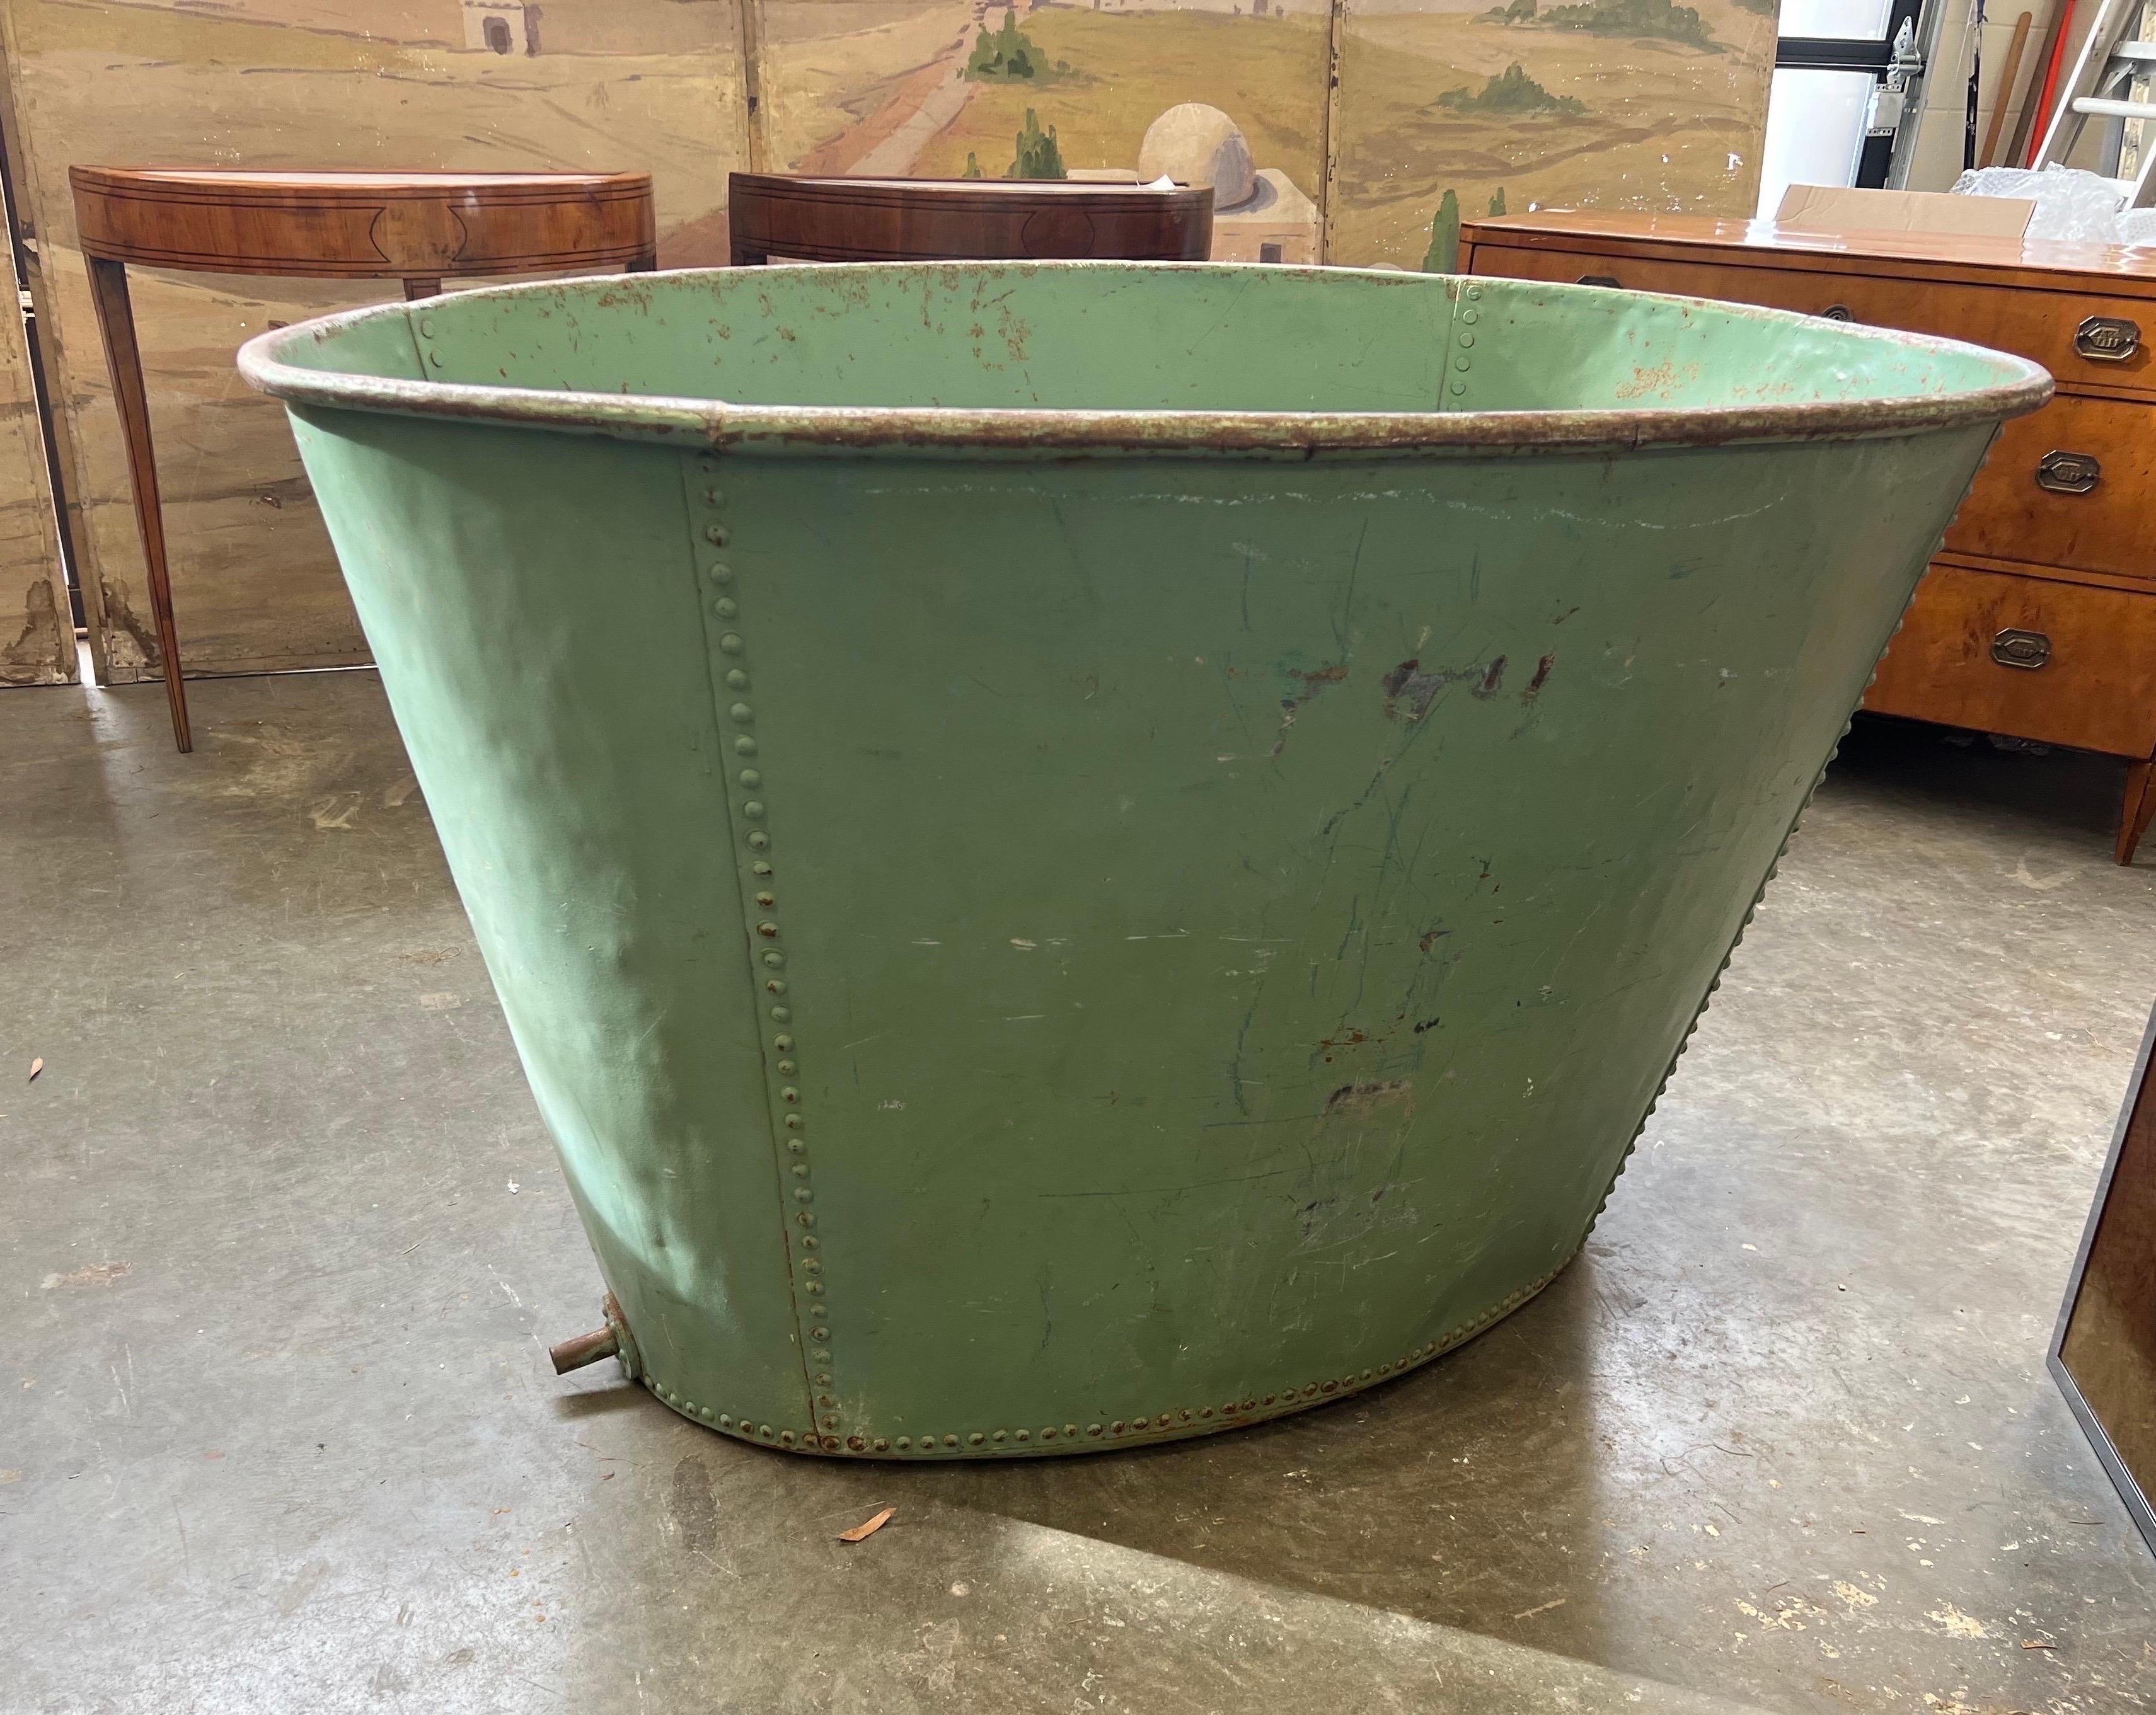 Fantastic 19th century oversized painted French tub, probably used for grapes and winemaking. Hand hammered and riveted, painted green and working drain in the bottom. In addition to making a spectacular working tub, this would also be great as a